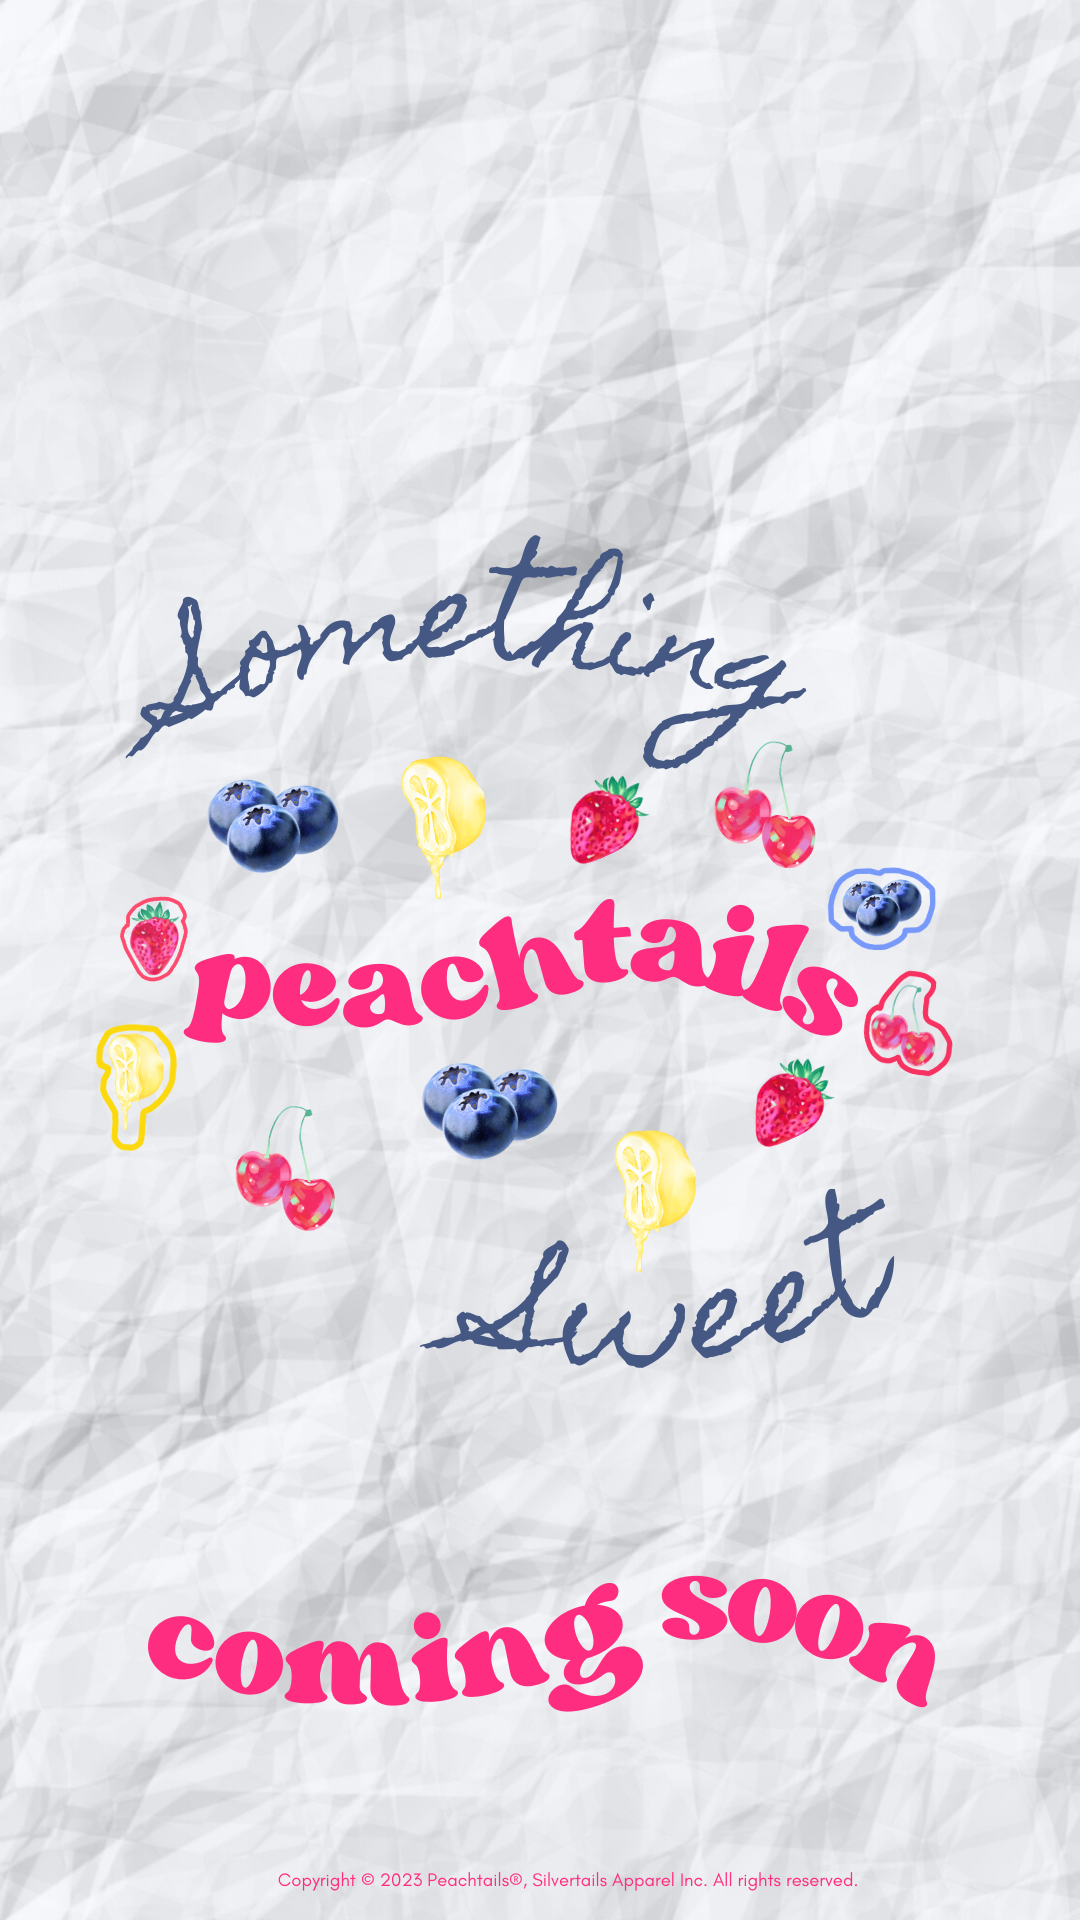 The image is a crumpled paper background with the words "something sweet peachtails coming soon" arranged in an arch. "Peachtails" is in the center in larger pink letters. Surrounding the text are colorful drawings of fruits and ice pops, including blueberries, strawberries, cherries, and more. At the bottom, the text is in bold pink, announcing an upcoming event or product. The copyright statement at the bottom attributes it to Peachtails© and Silverlakits Apparel Inc.